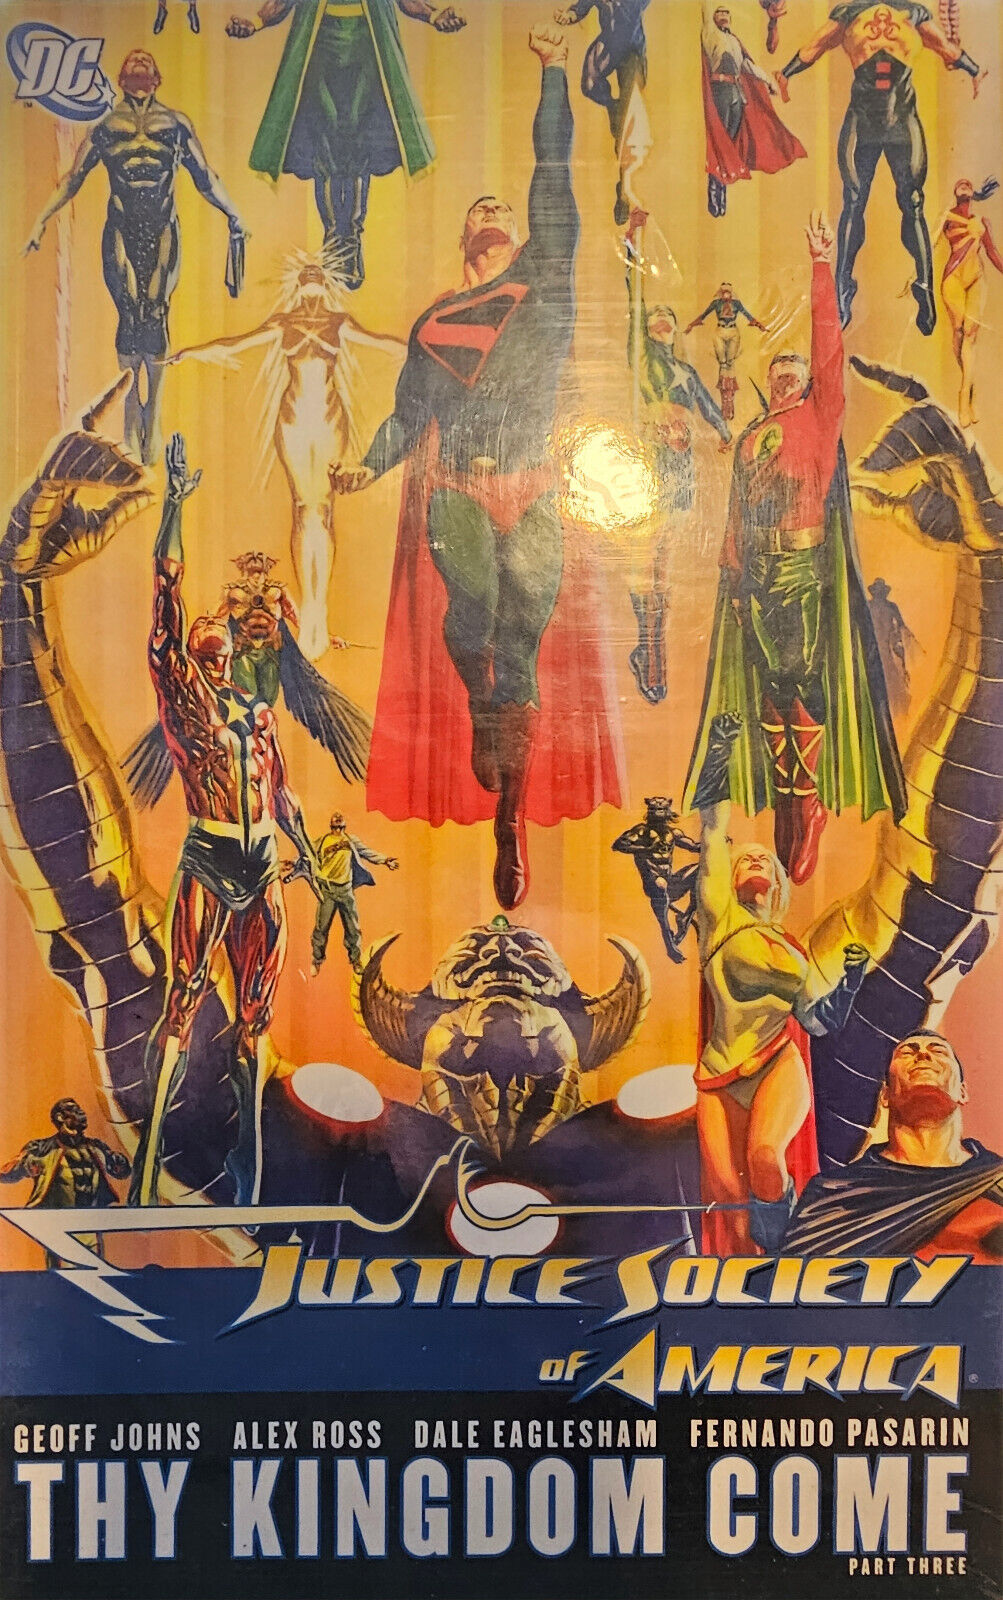 Justice Society of America: Thy Kingdom Come, Part III GOOD CONDITION